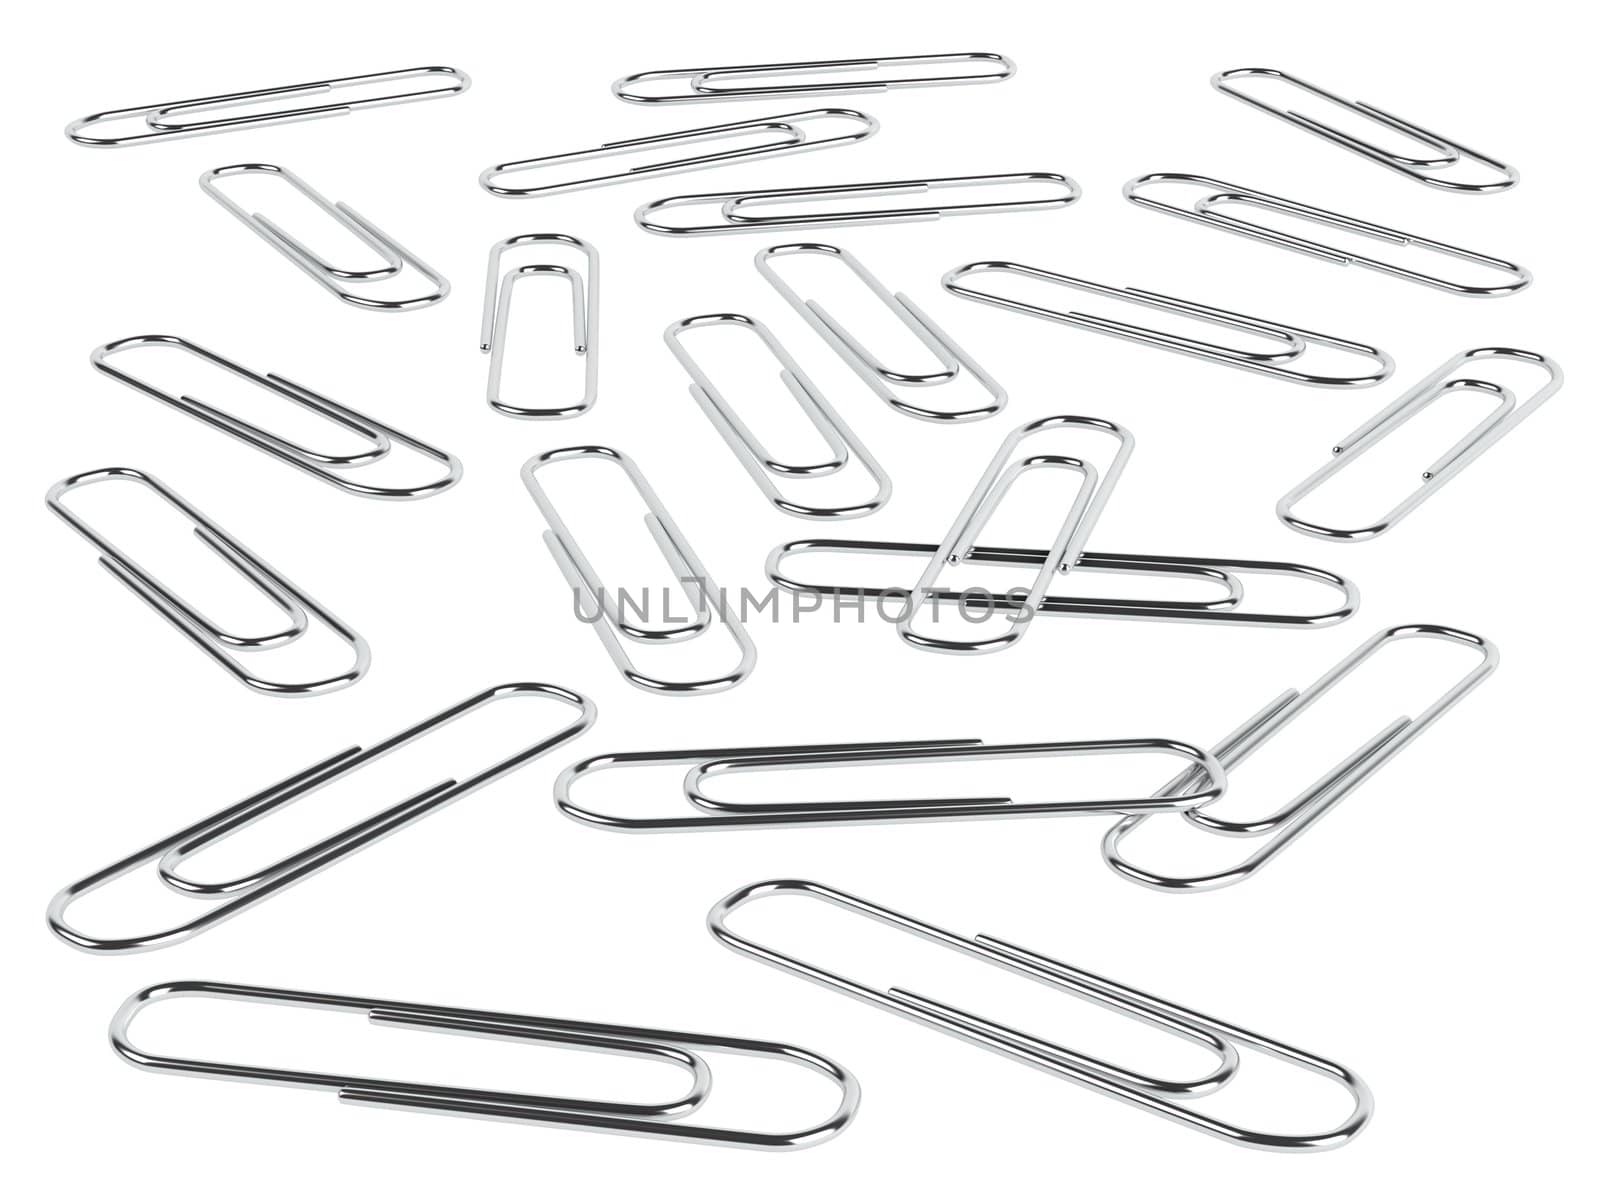 Paper clips isolated on white background